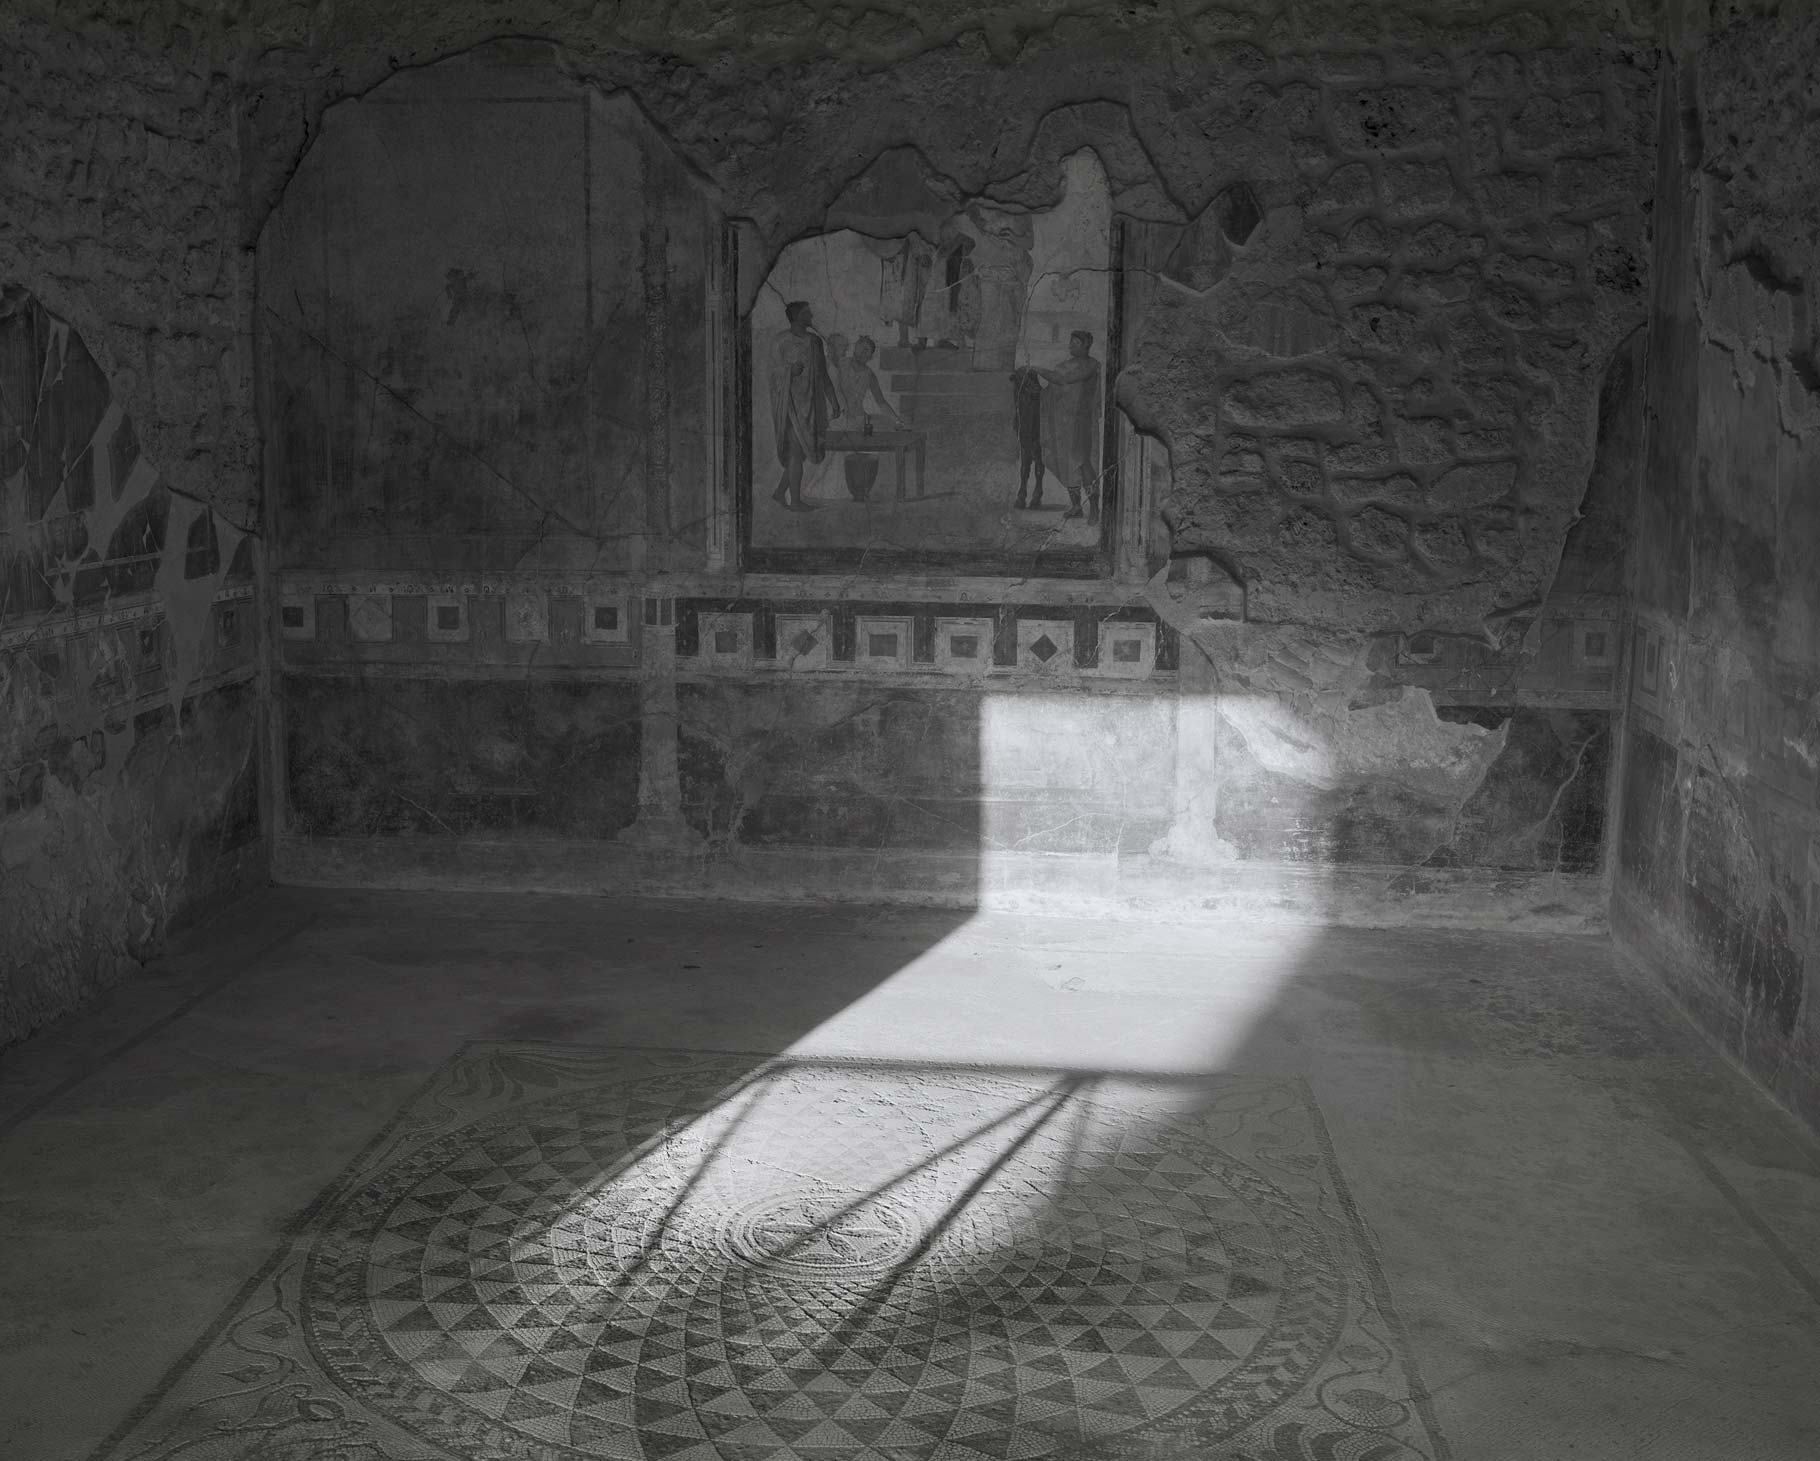 Inside of a room with intricate art on the walls in pompeii, black and white image